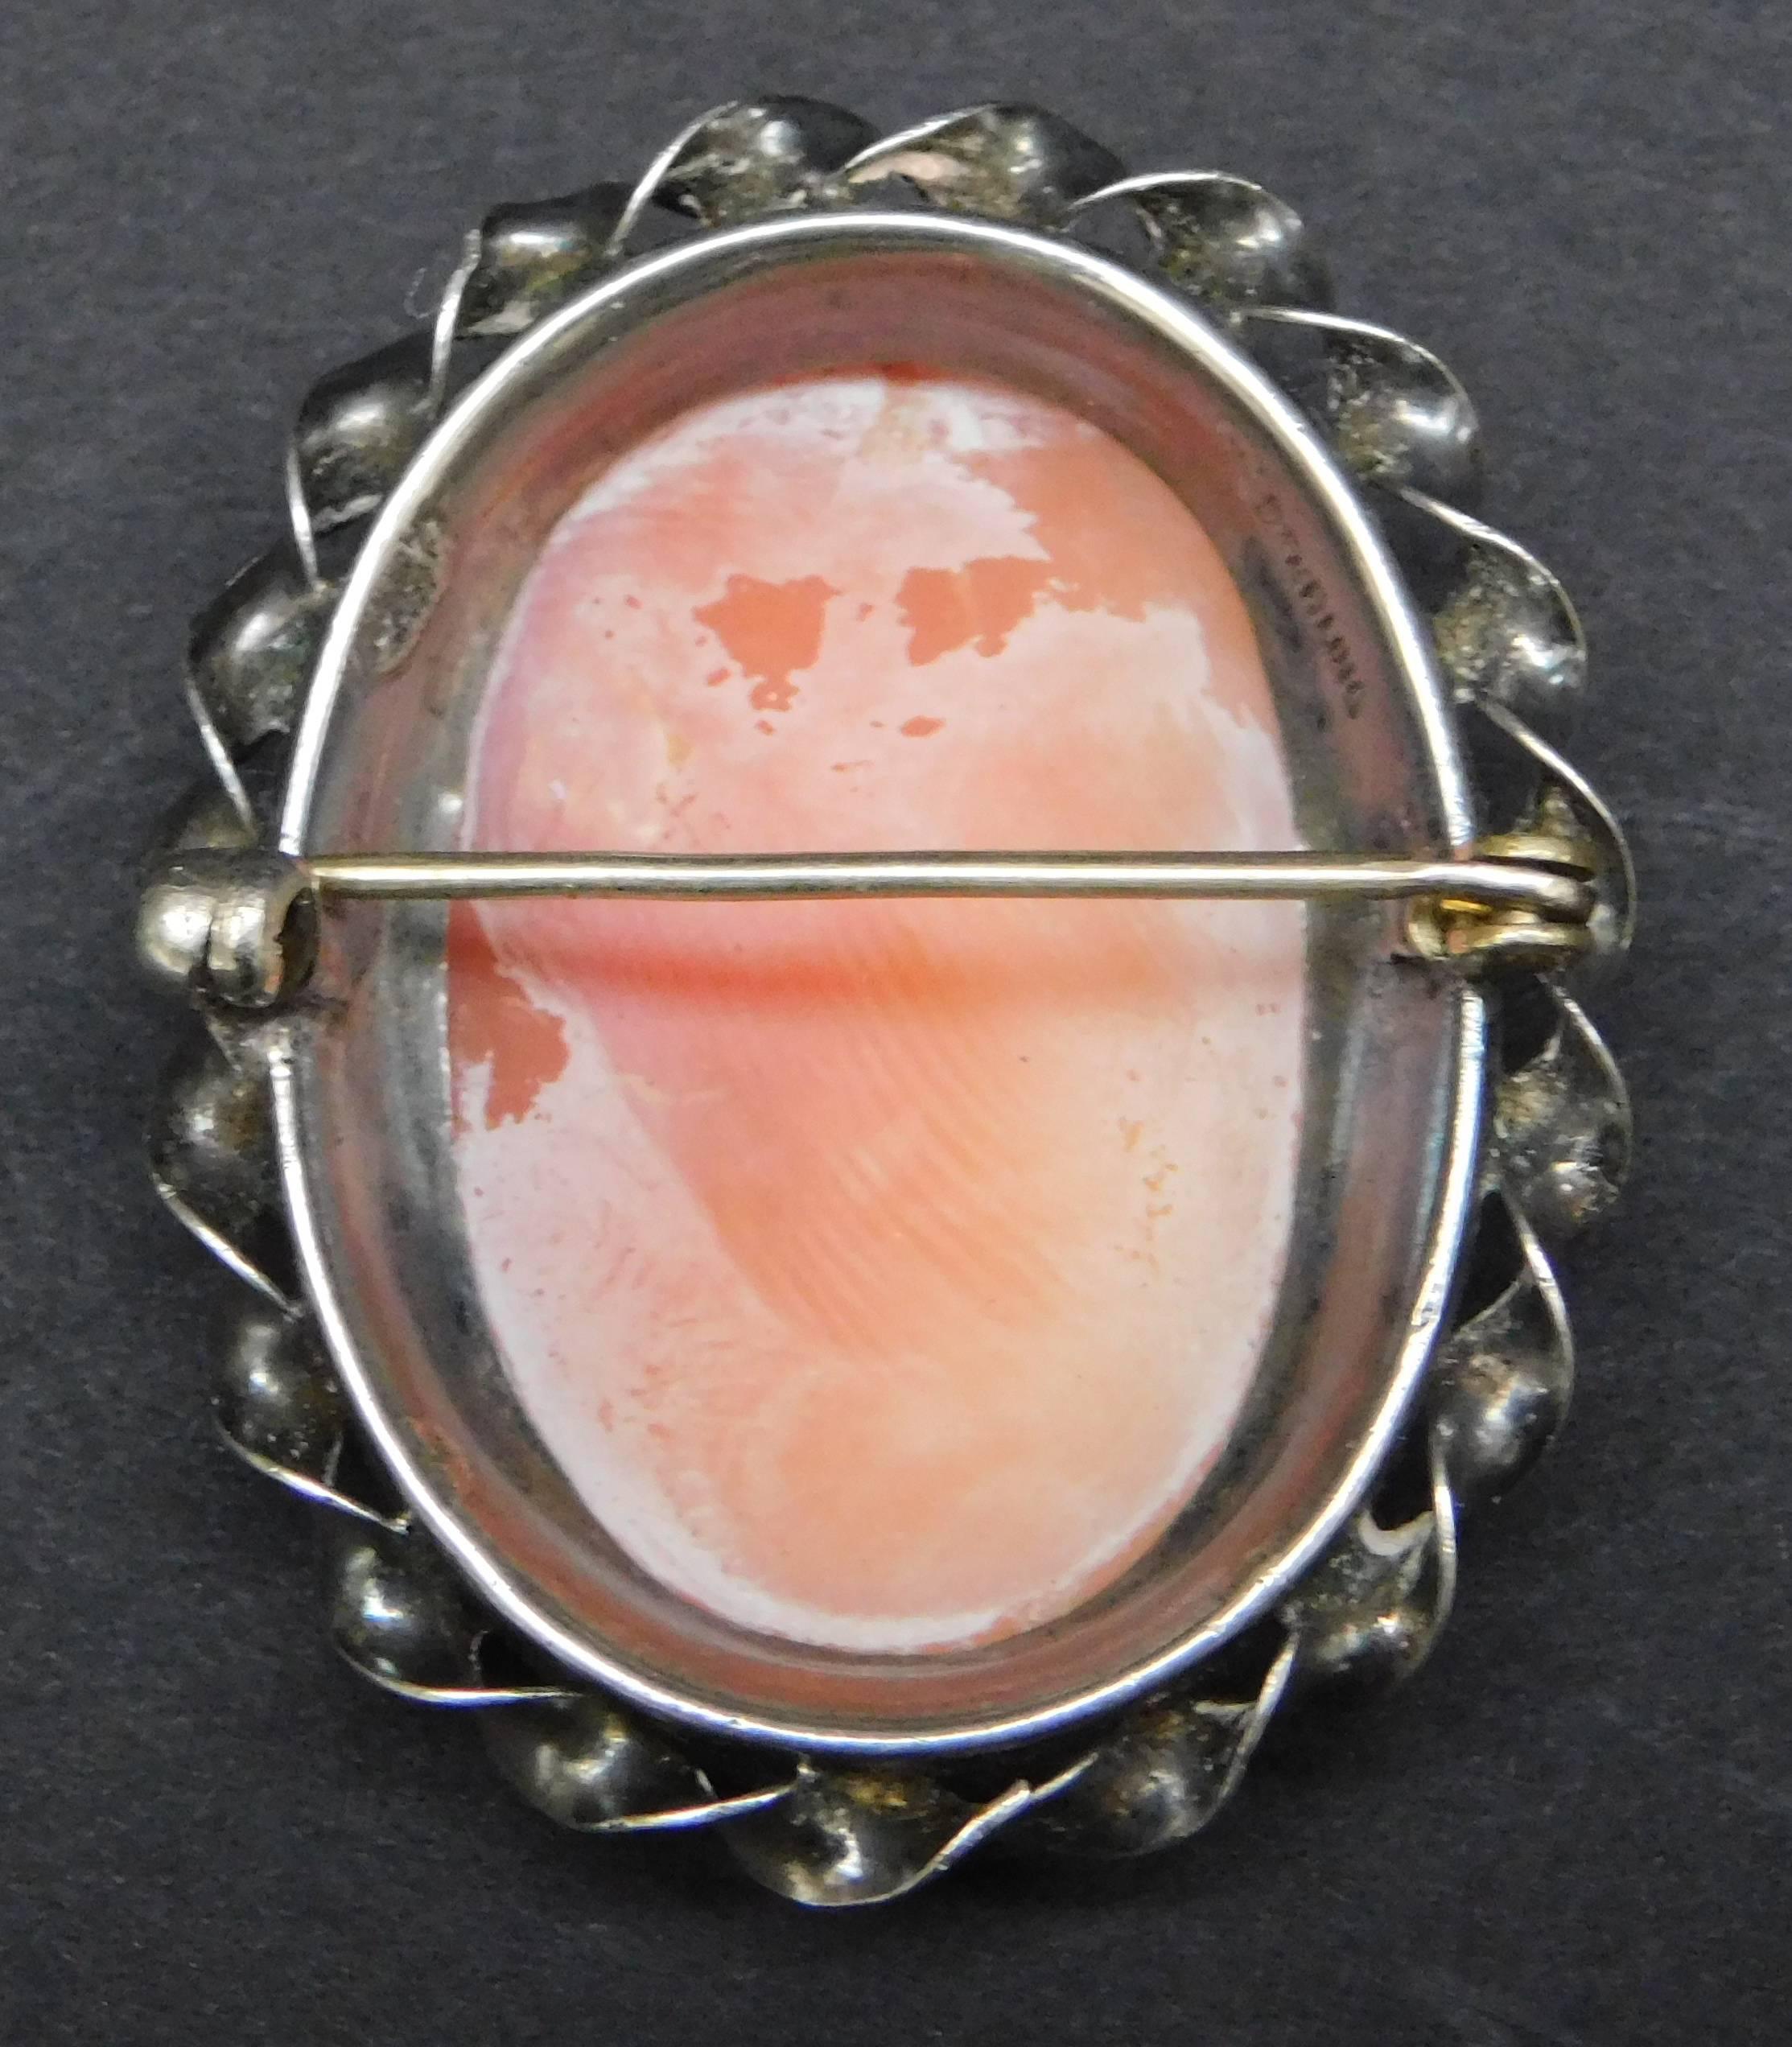 A lovely victorian Cameo brooch of hand carved conch shell set into sterling silver with a hand twisted silver frame. The medium size makes this the perfect brooch for a young lady.